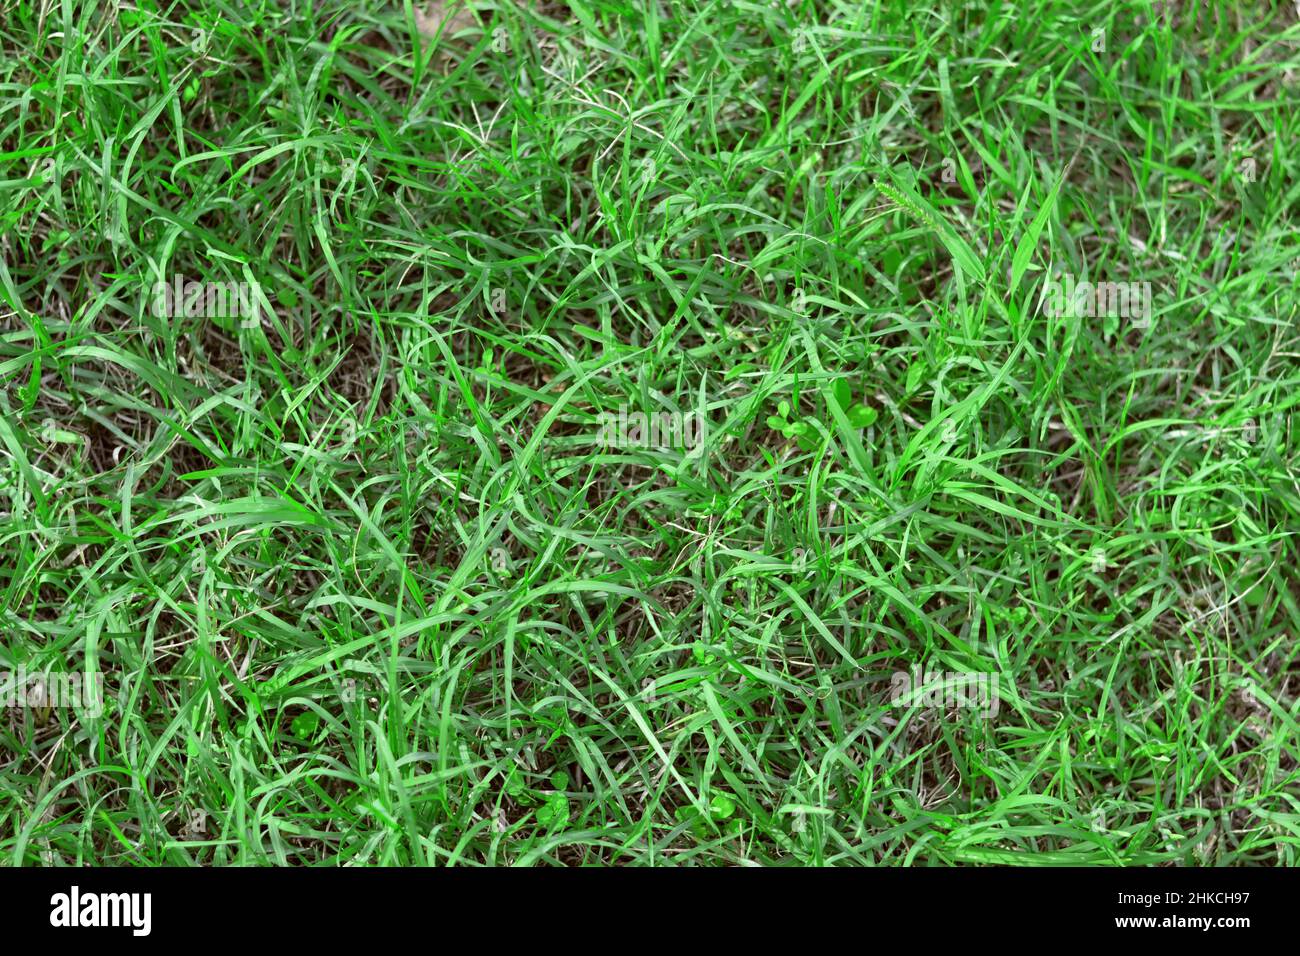 green grassland.Texture. Meadow grass background. Stems and leaves of soft green lawn grass.Drought tolerant lawn grass. Stock Photo